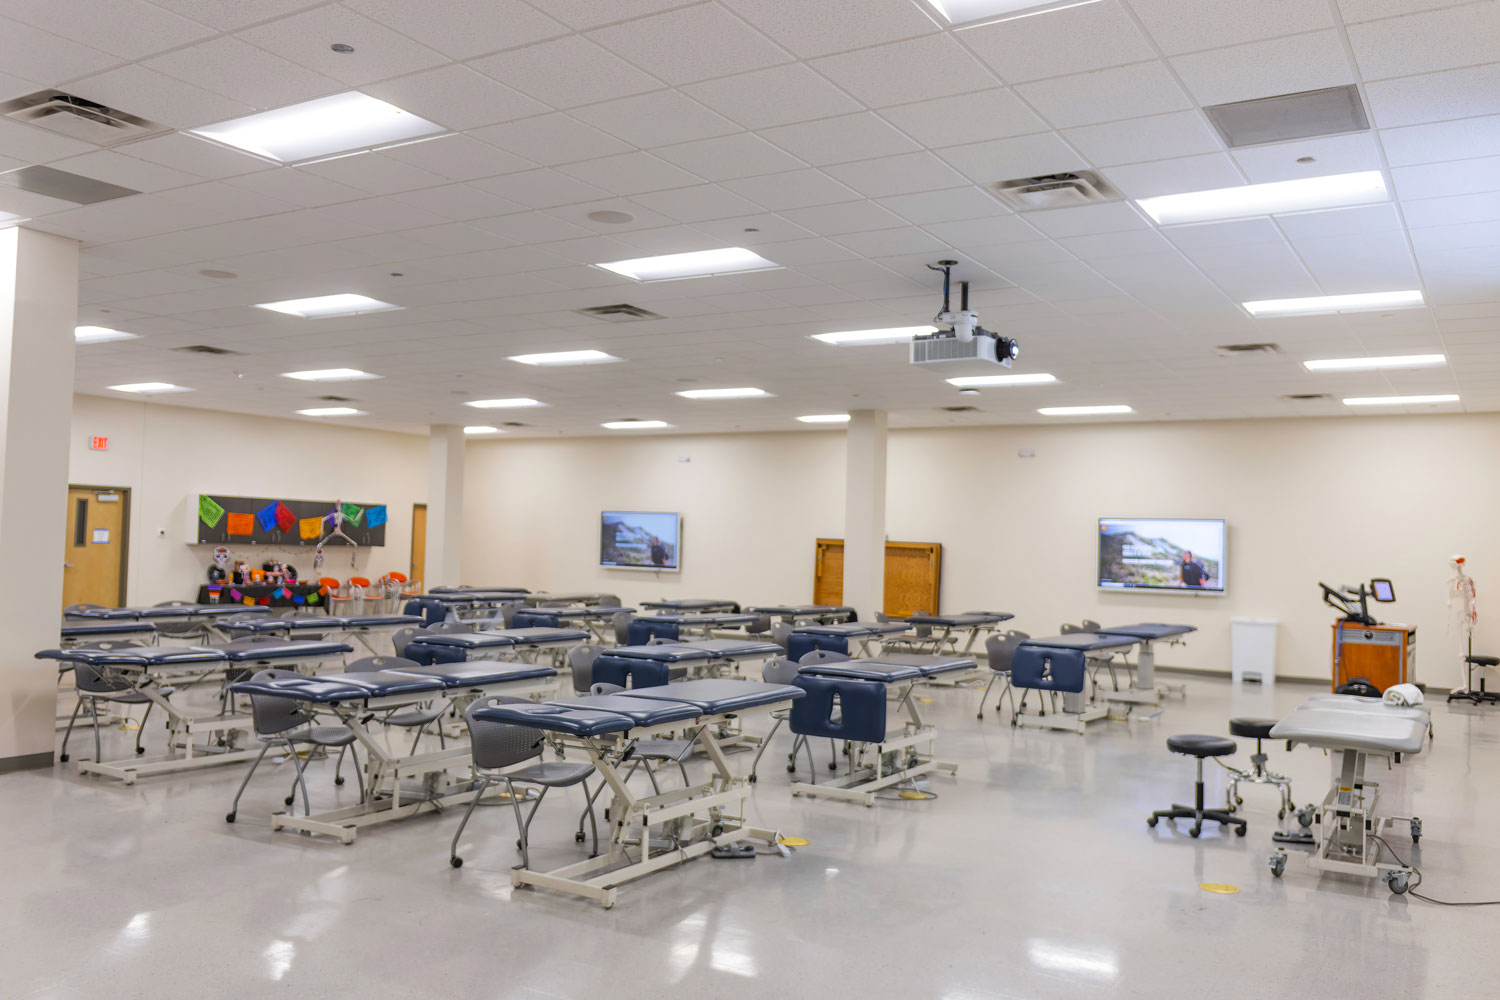 The Life Sciences’ divisible rooms at UTEP had to function as active learning spaces and practical labs, as well as provide remote learning capabilities.